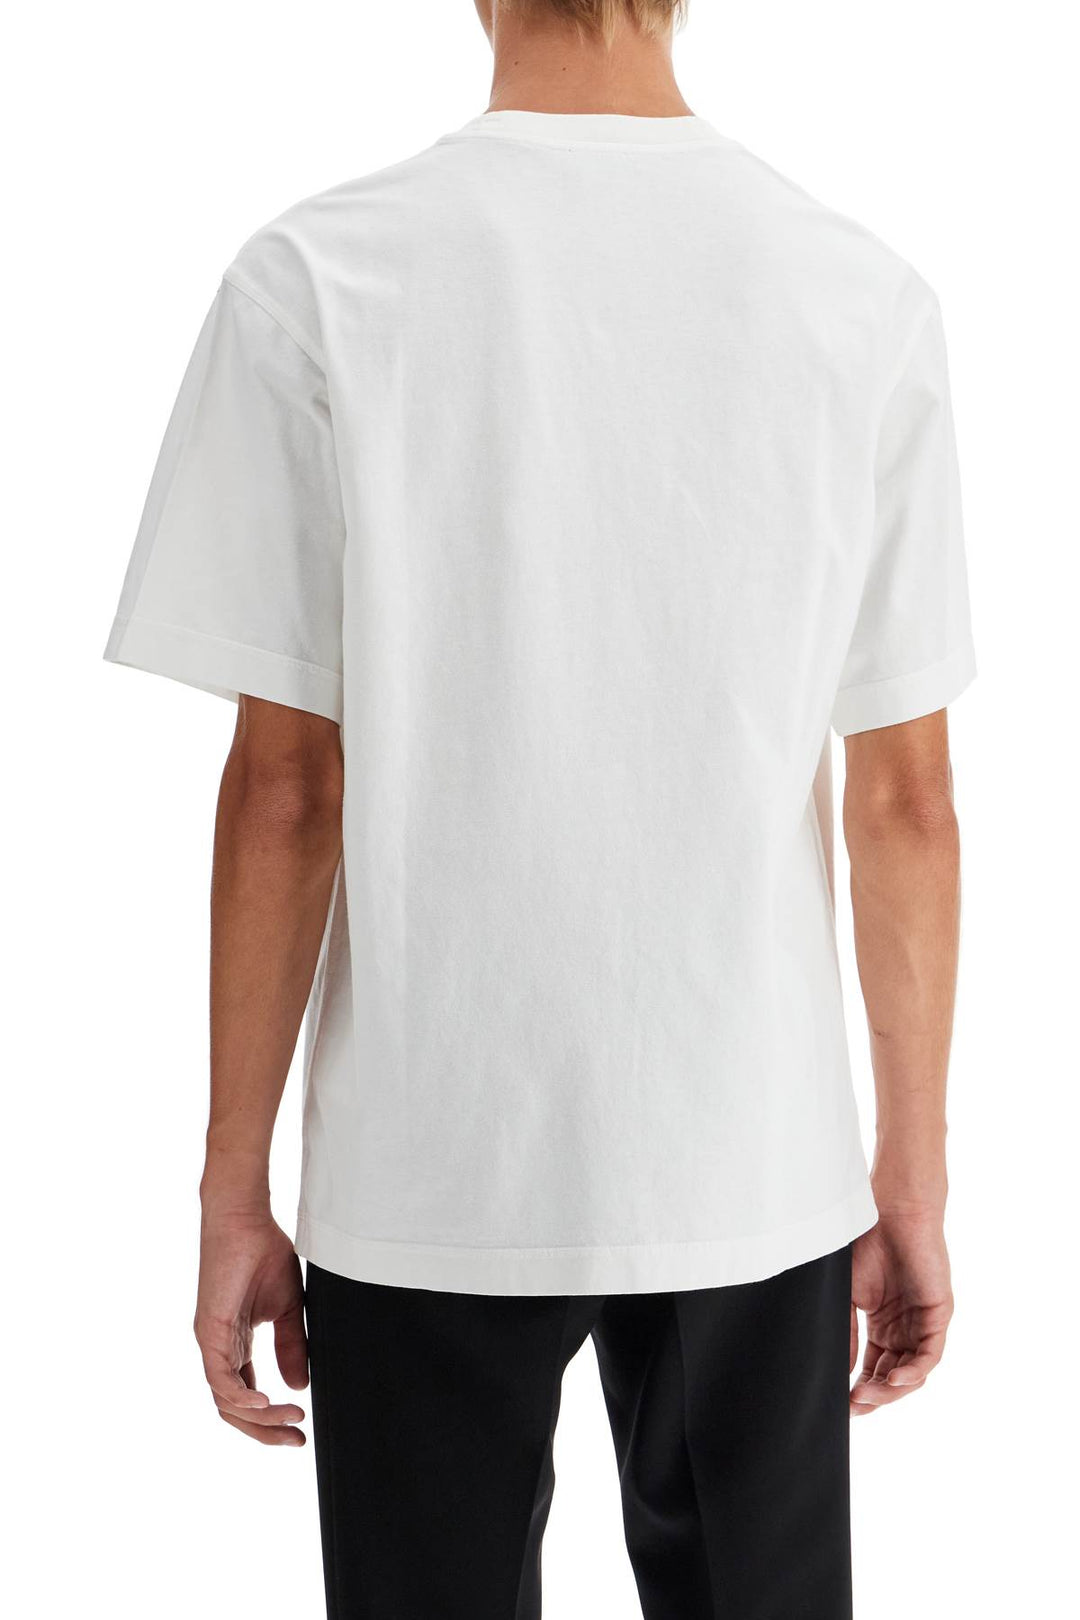 Burberry Ekd Embroidered T Shirt   White